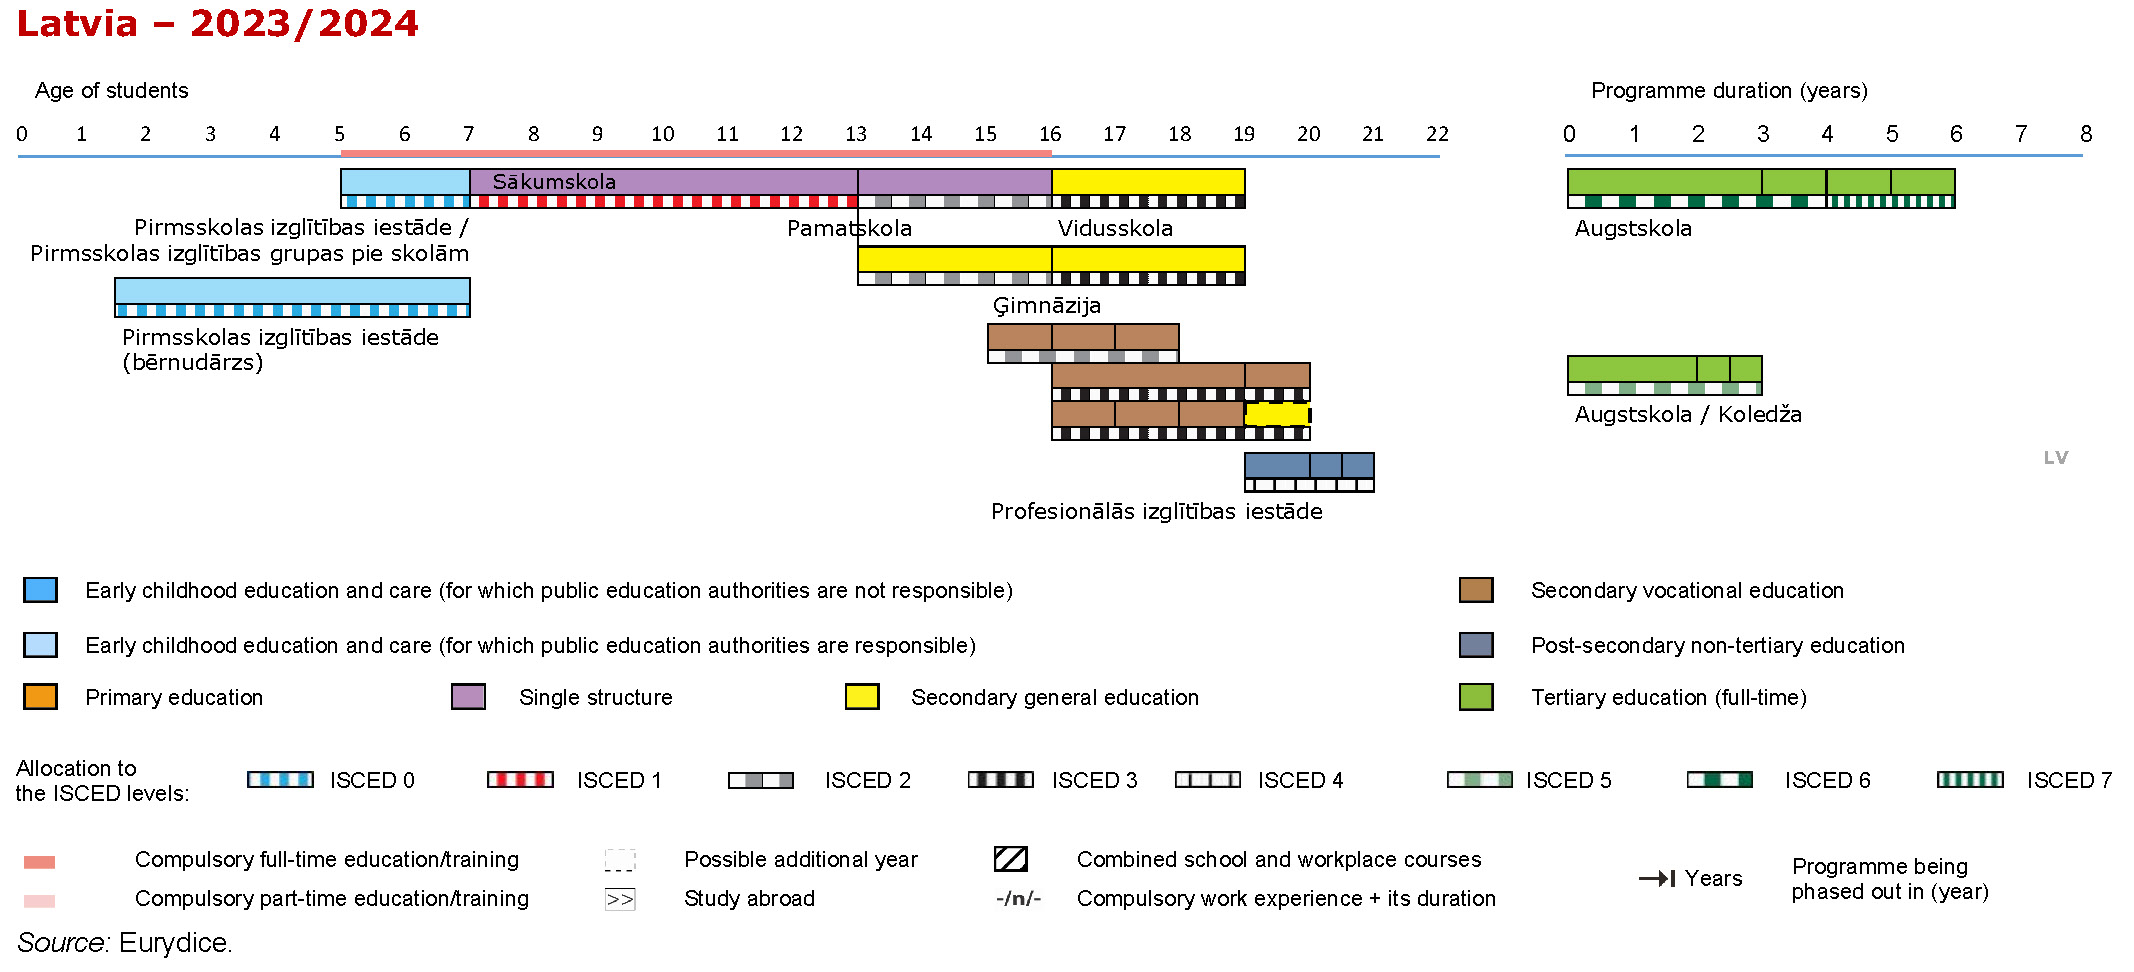 Structure of the National Education System LV